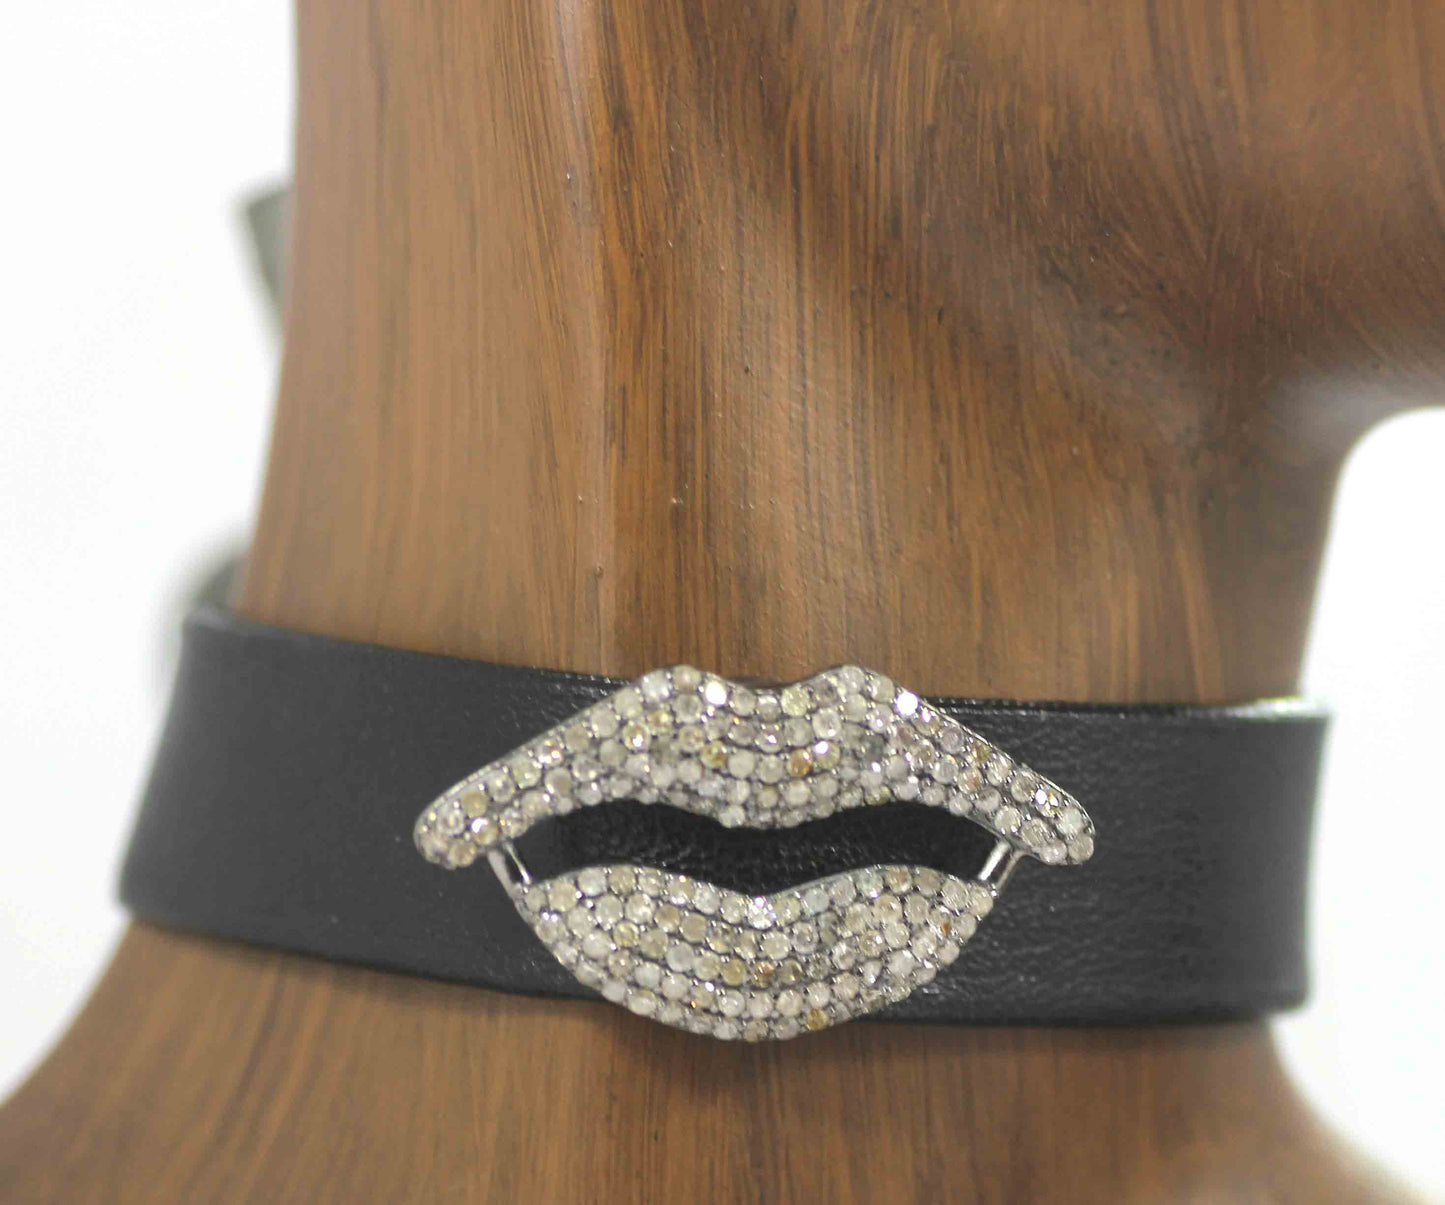 Lips Shape Leather Choker Necklaces With Pave Diamond. 925 Oxidized Sterling Silver Diamond necklaces, Genuine handmade pave diamond necklaces.